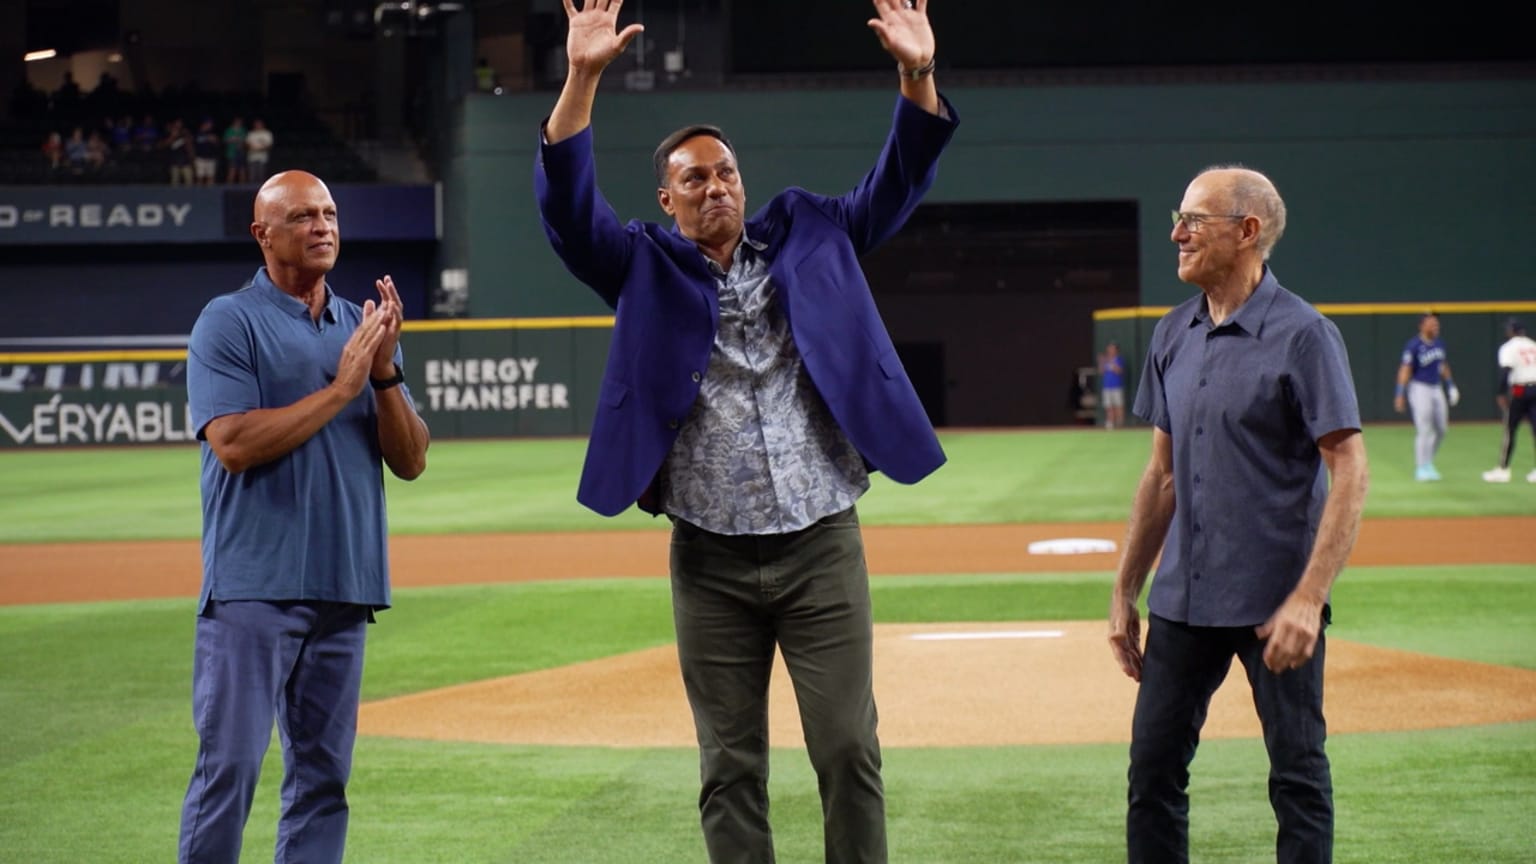 Juan Gonzalez to throw out opening pitch Friday - Lone Star Ball